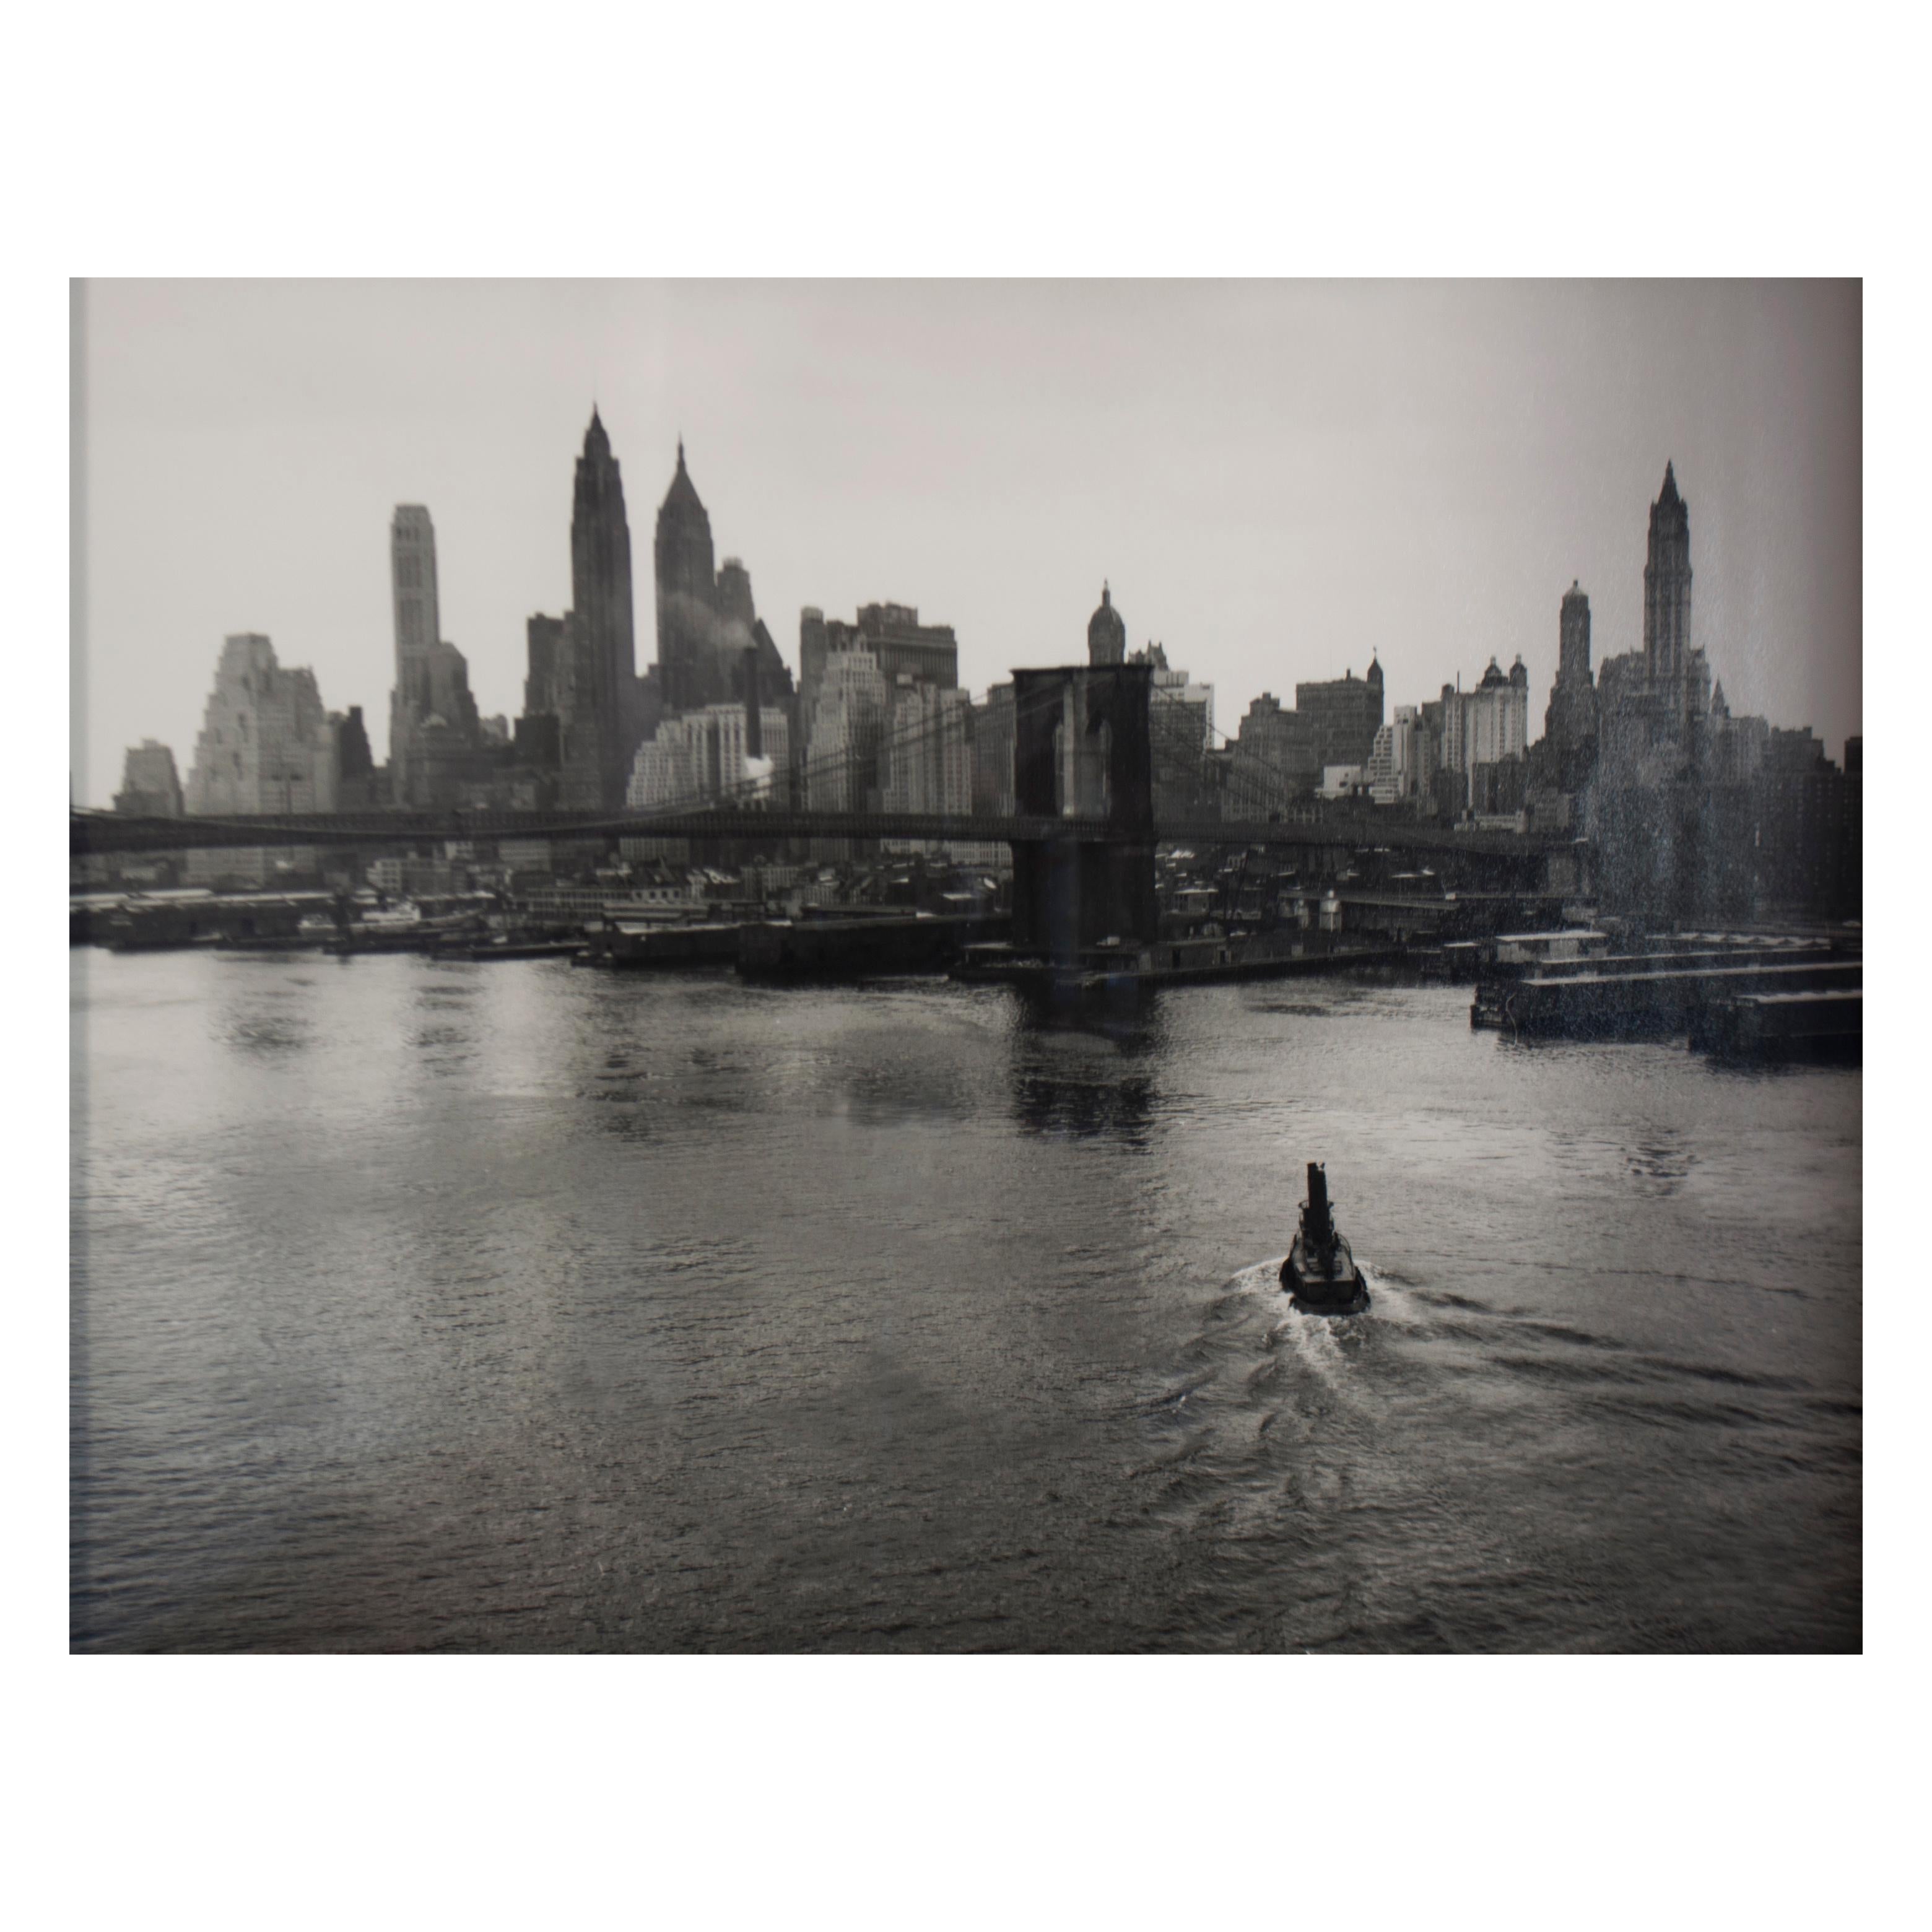  'Vintage Manhattan Skyline' with River', by Unknown, Black & White Photograph